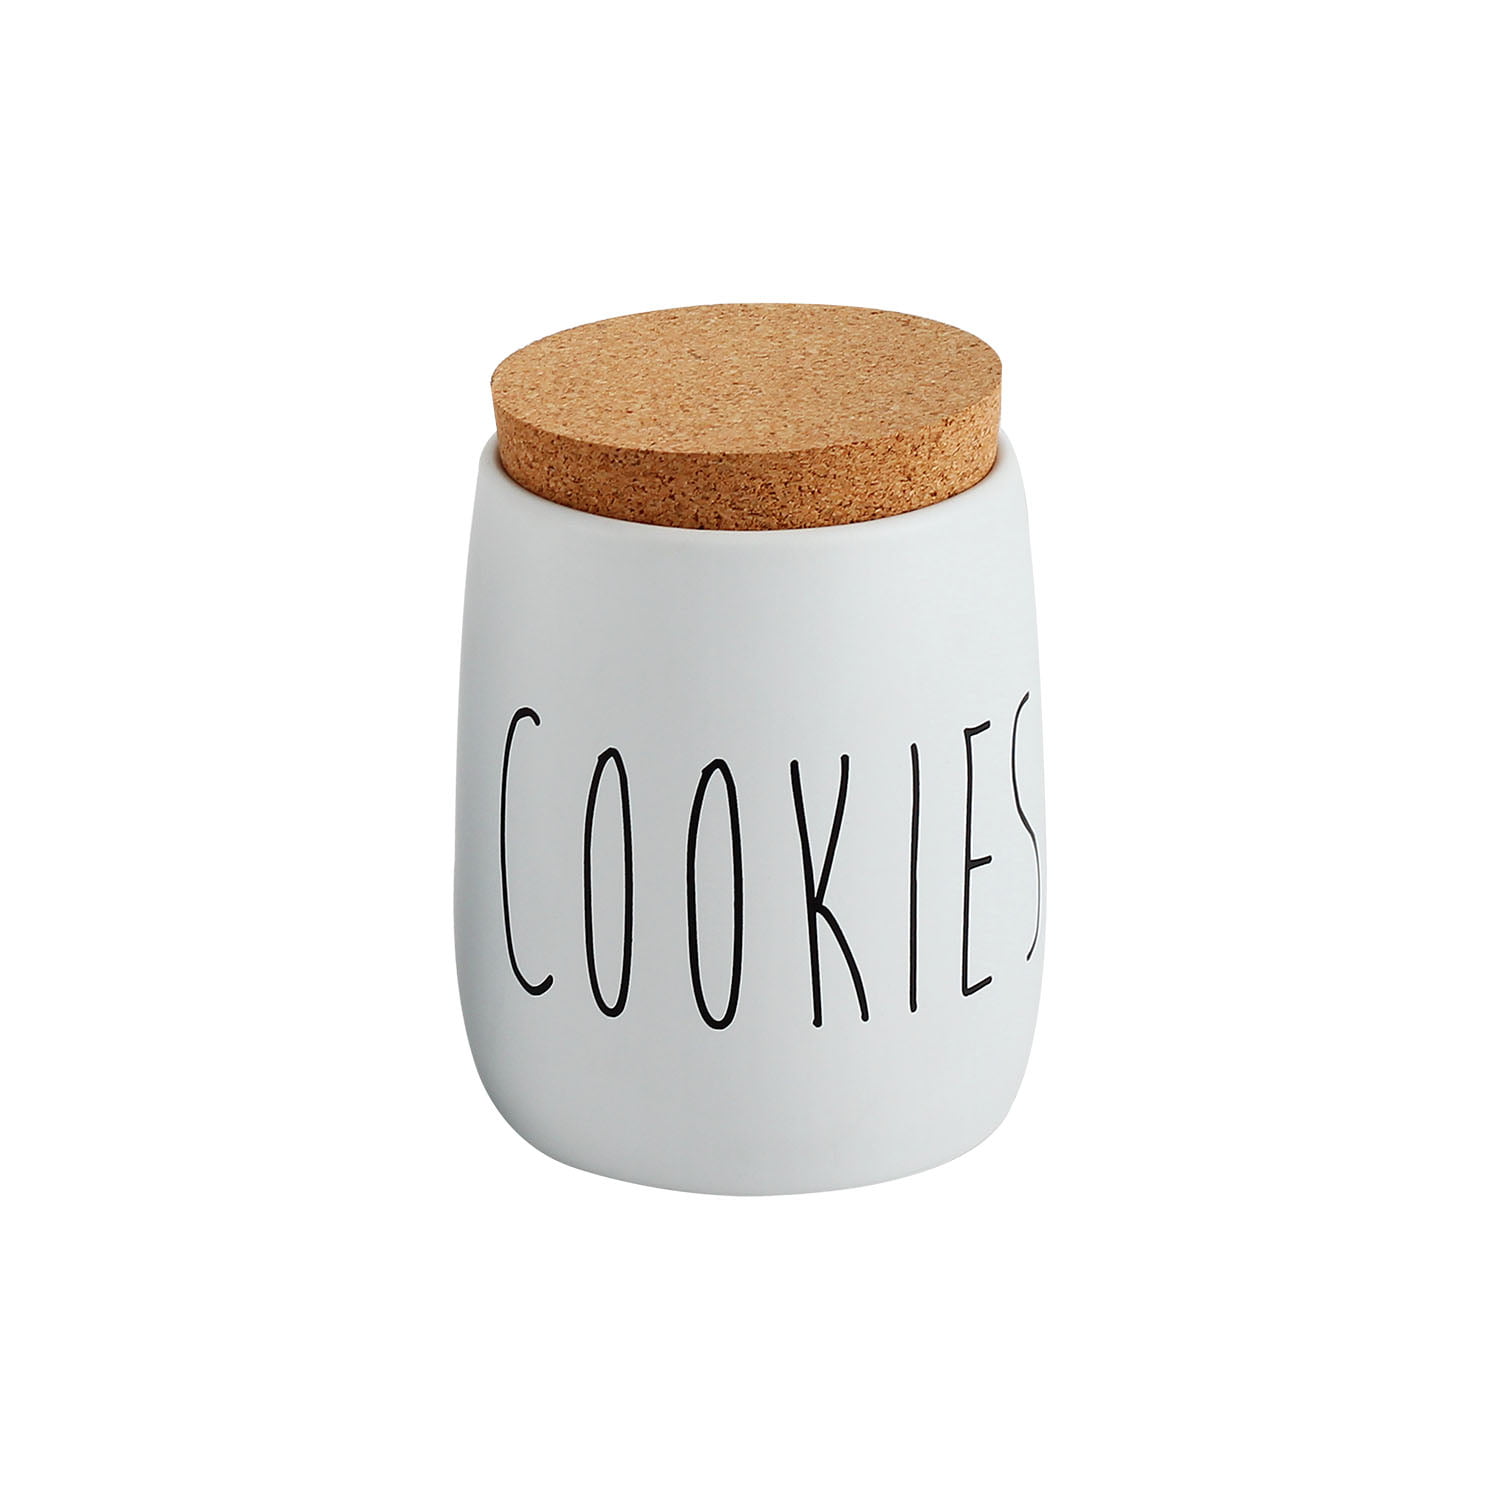 Day by Day - Cookies - Porta Condimentos 850 ML